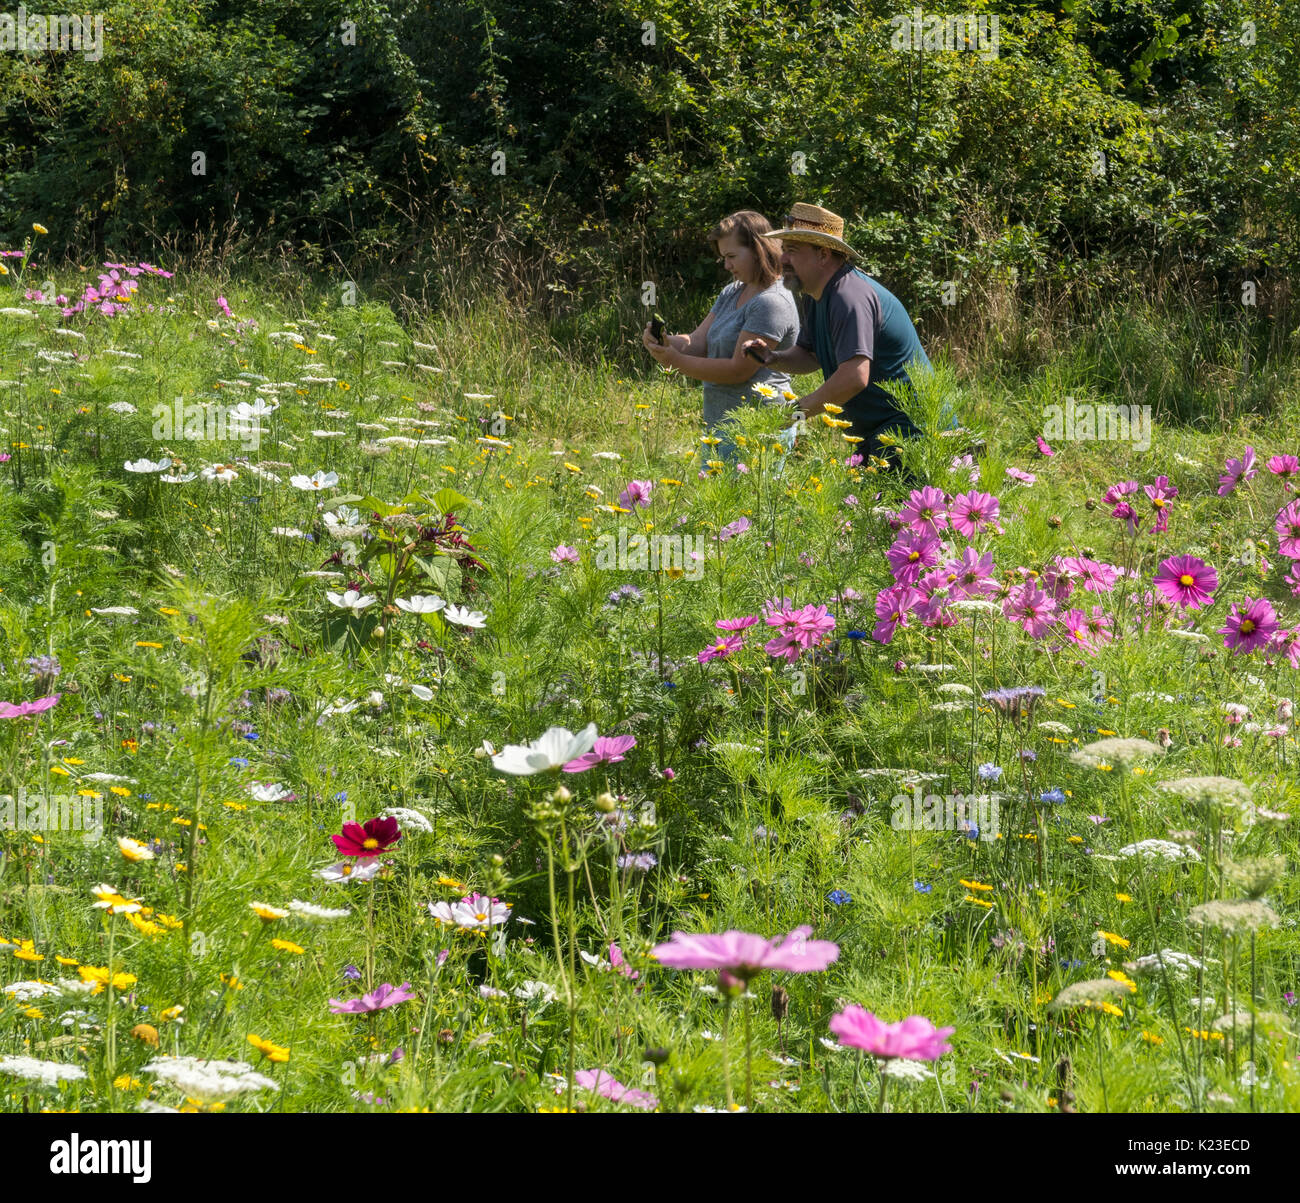 Sidmouth, Devon, 28th Aug 17. Glorious bank holiday weather draws crowds of visitors to the wild flower meadows in Sidmouth, alongside the famous 'Byes' riverside walk.  Credit: Photo Central/Alamy Live News Stock Photo